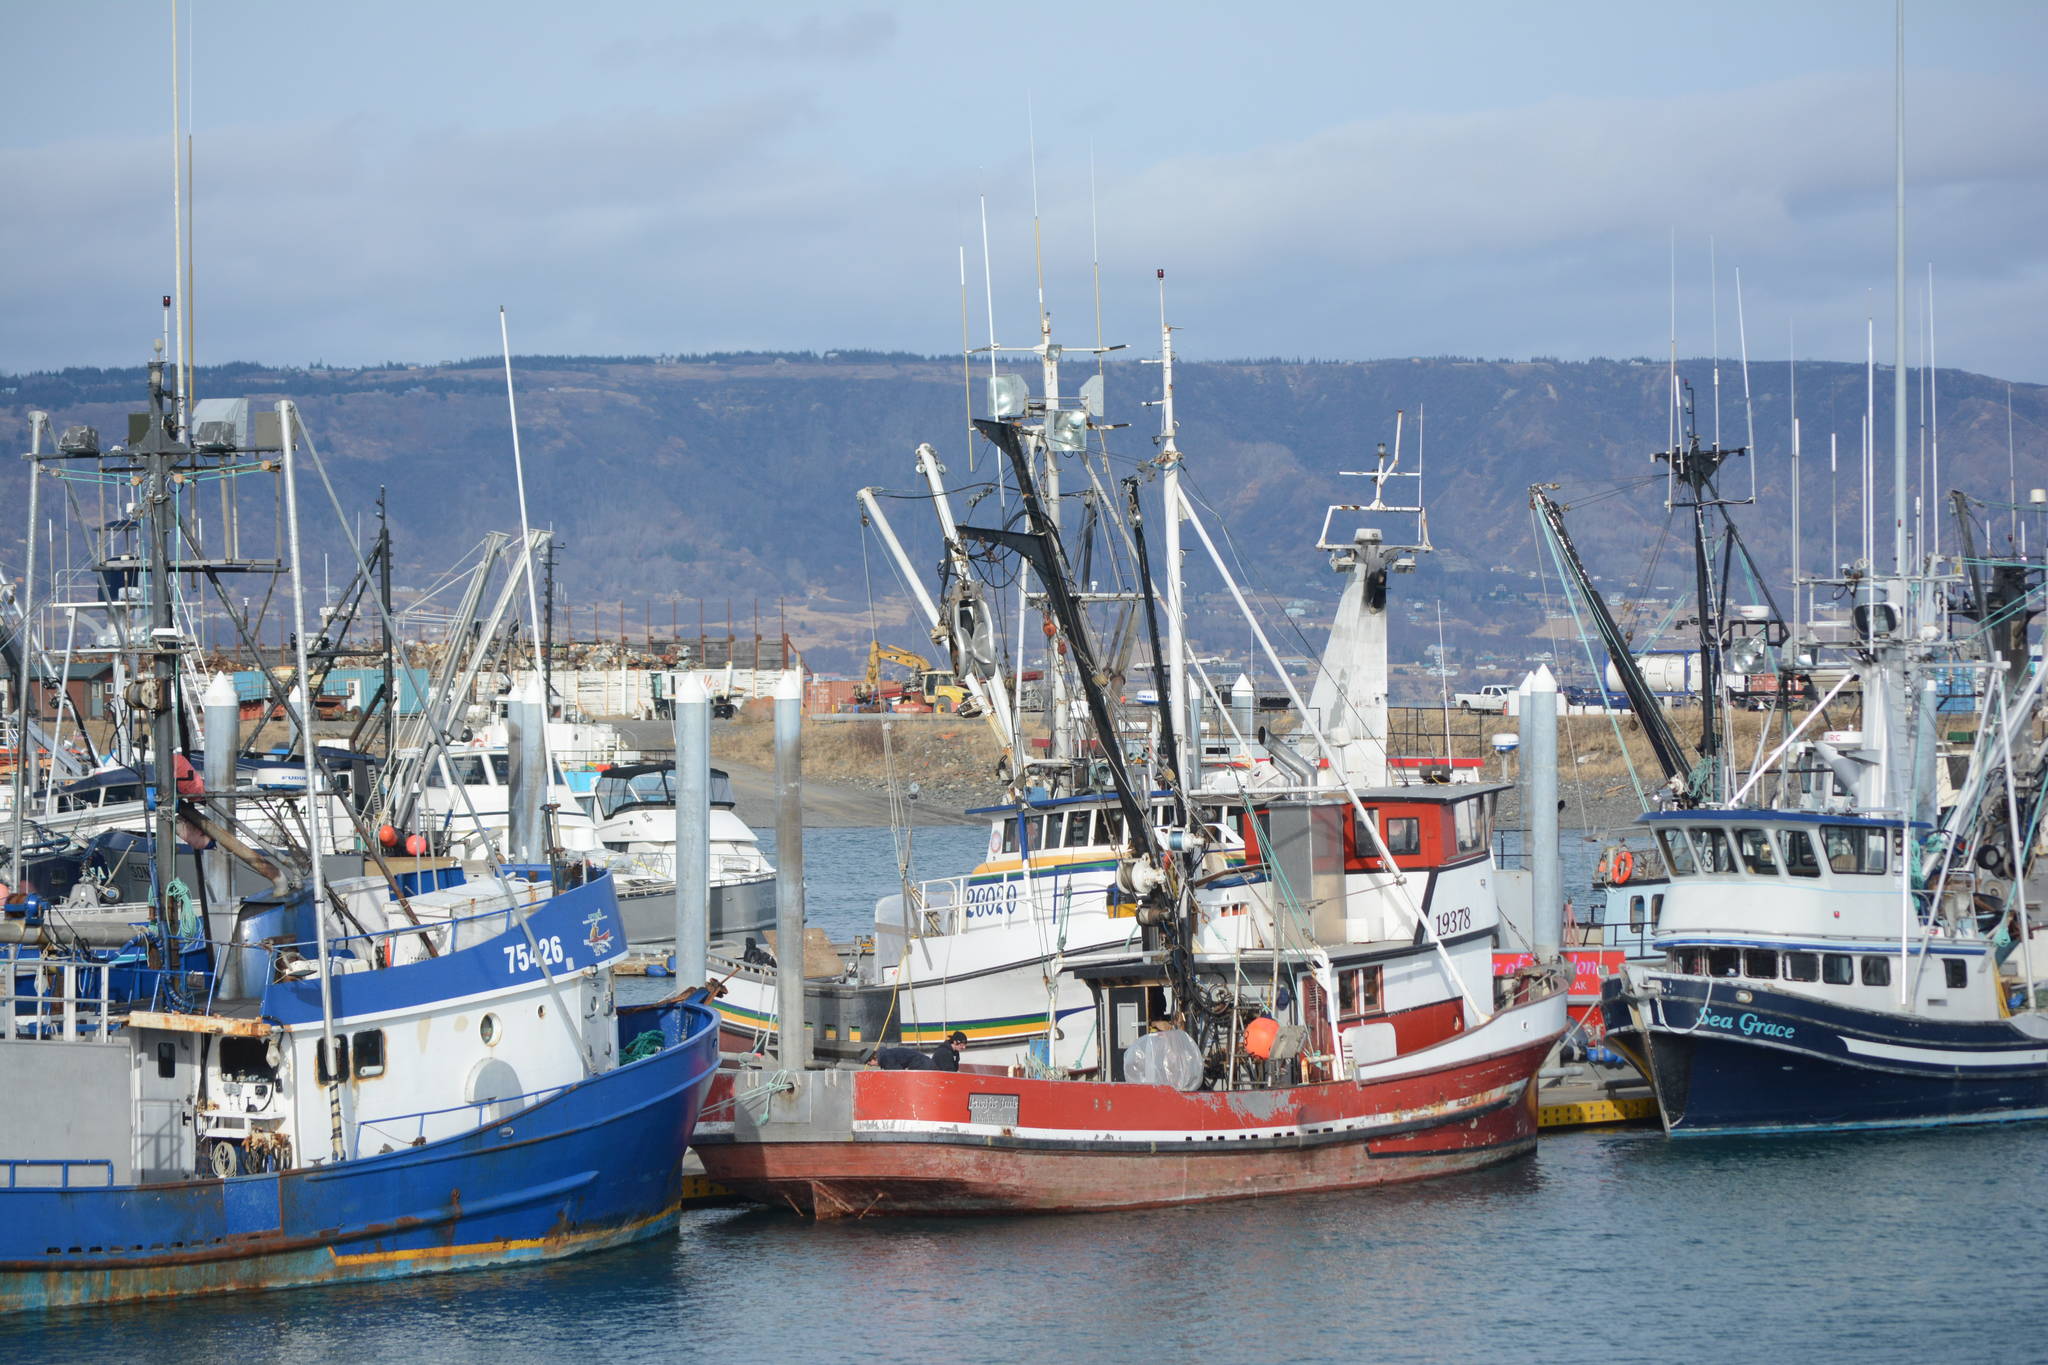 Seawatch: Public questions Board of Fisheries nominee